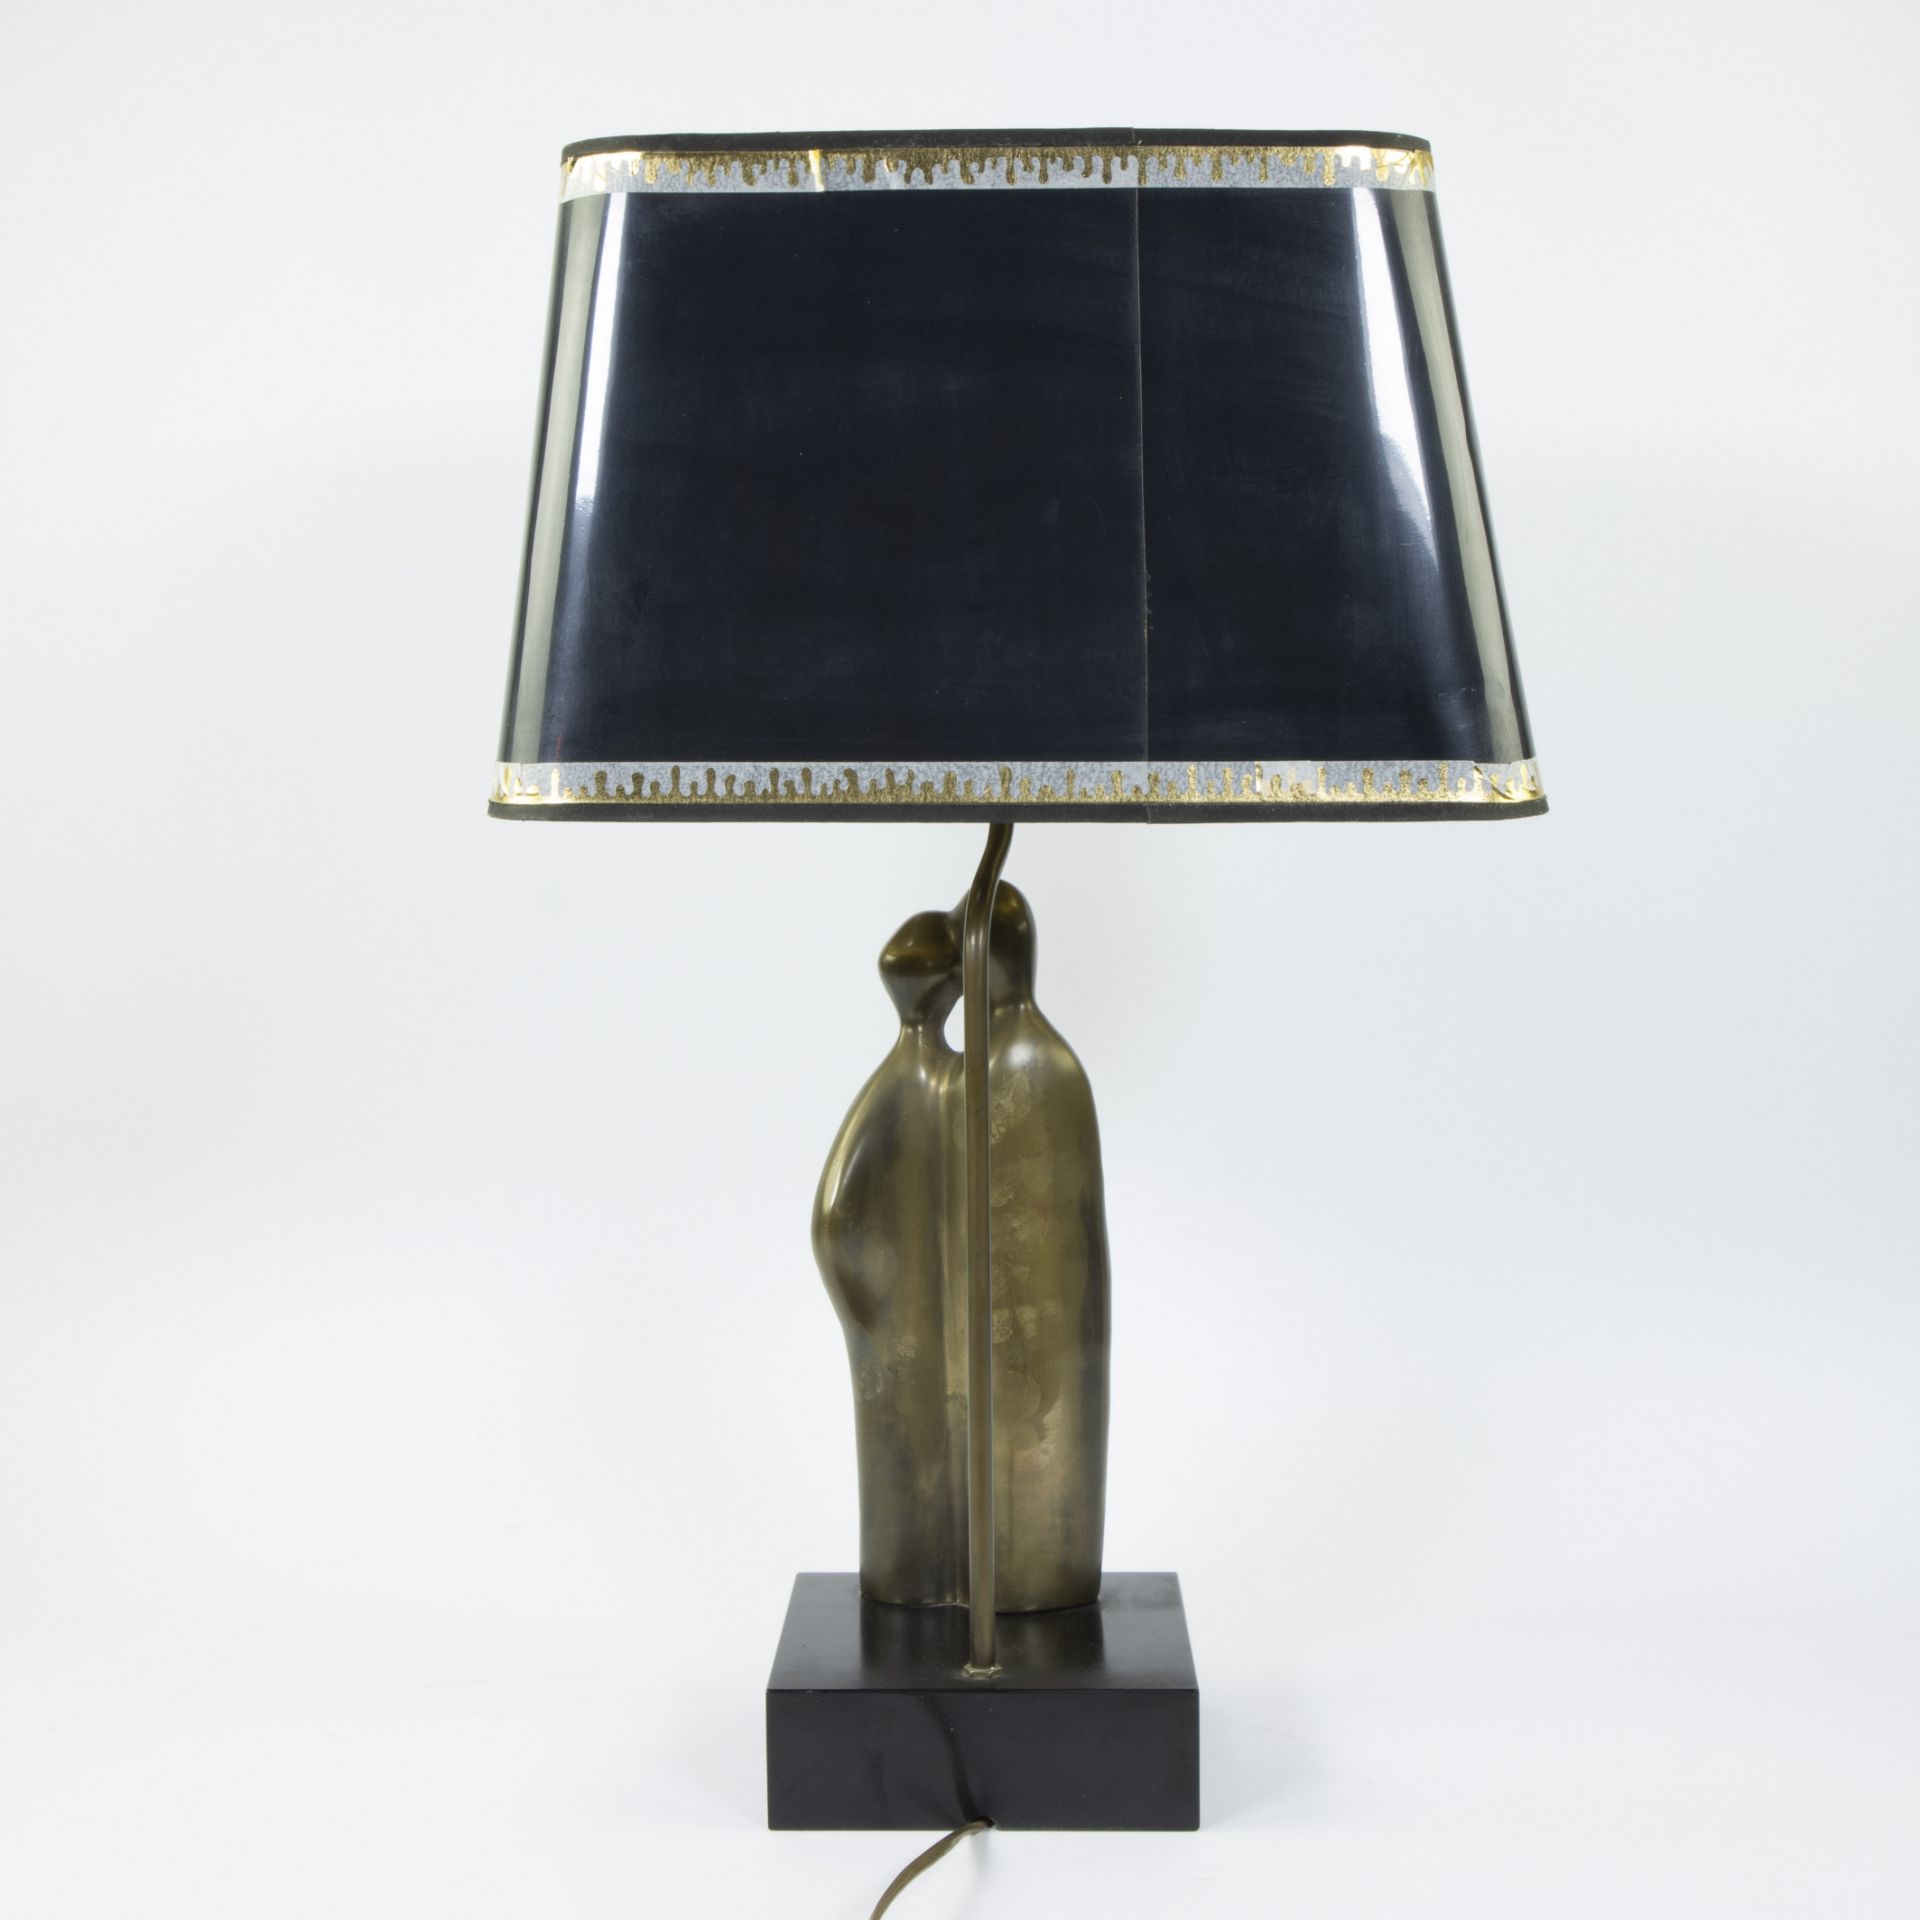 Vintage brass table lamp, style Maison Charles - Image 3 of 4